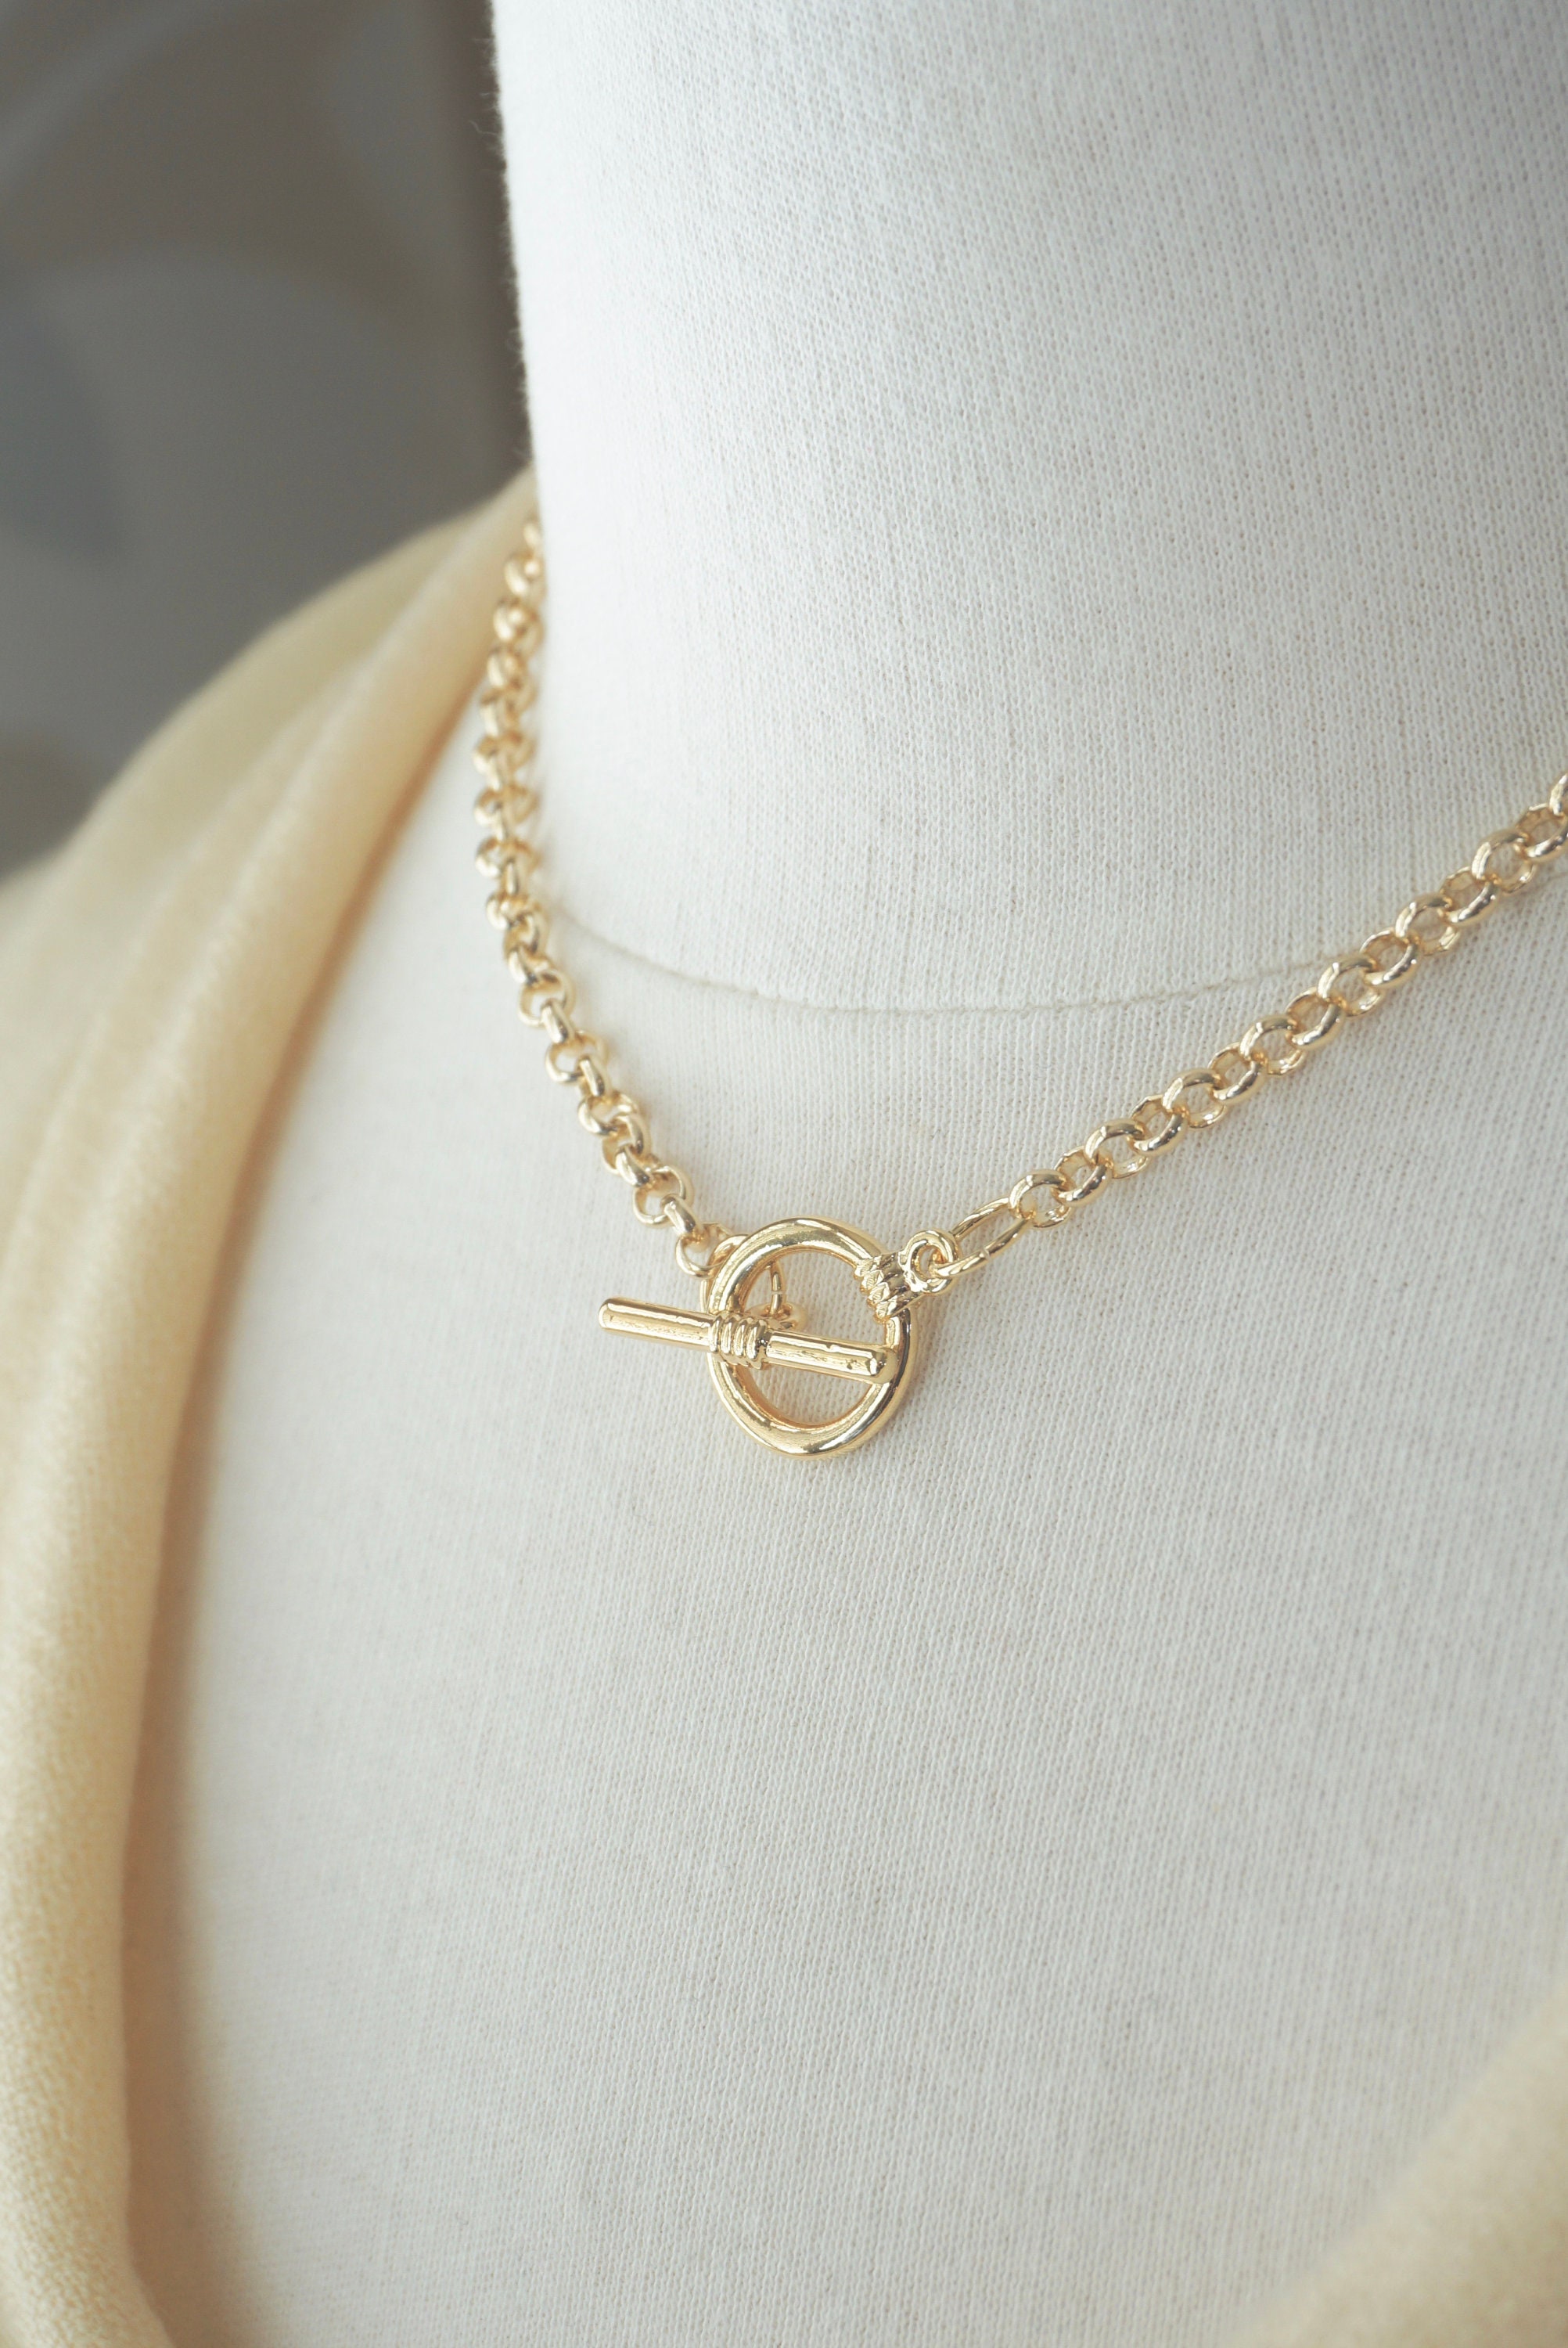 Gold Toggle Necklace Chunky Chain Choker Chunky Chain Link Necklace  Stacking Necklace Front Toggle Necklace Toggle Clasp Necklace 